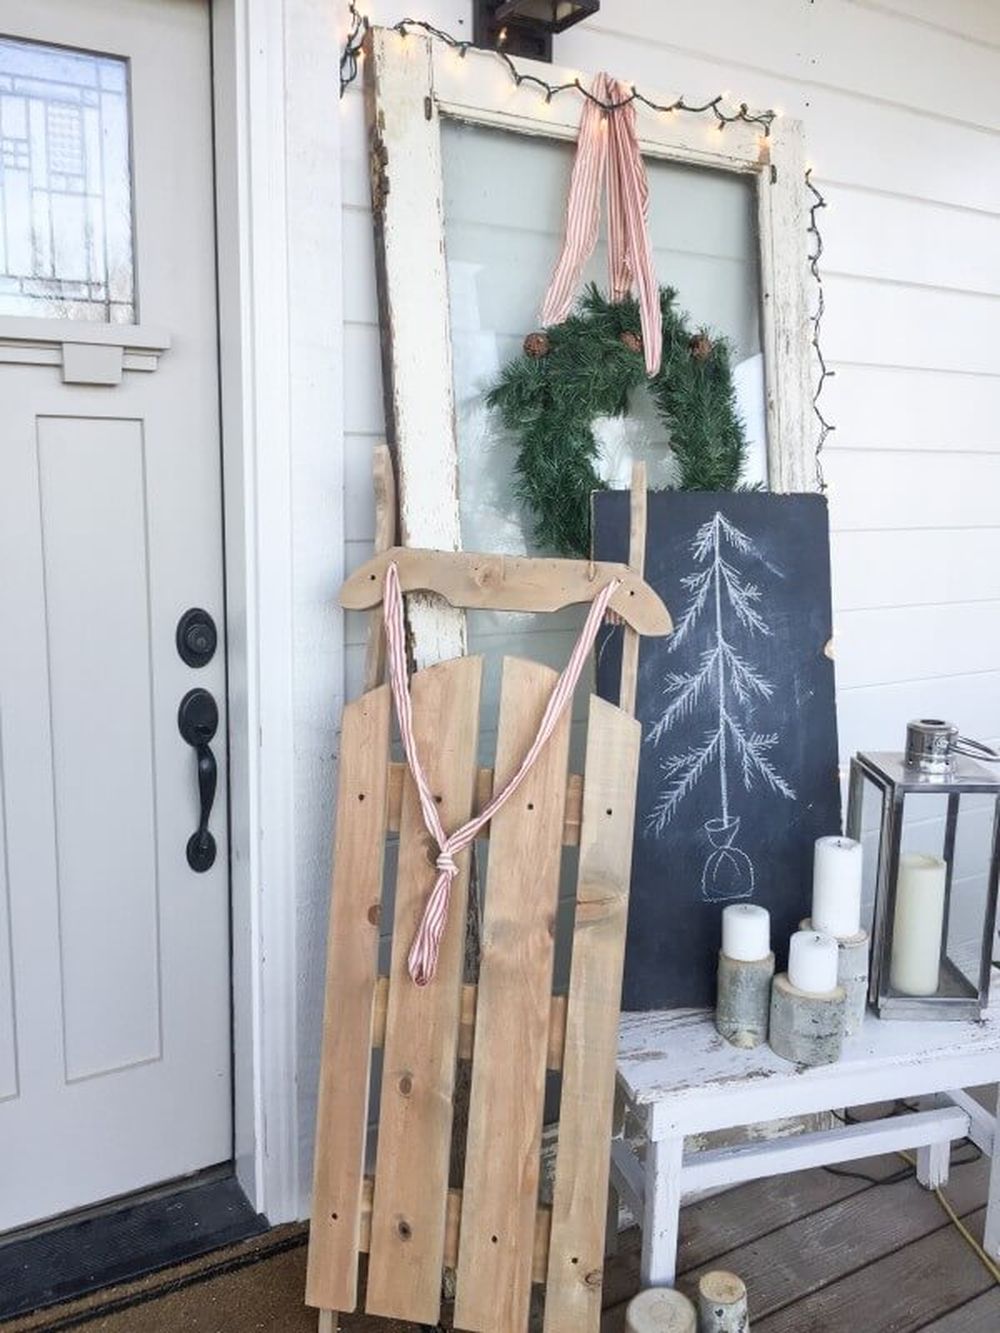 Diy vintage wooden sled christmas lawn decorations